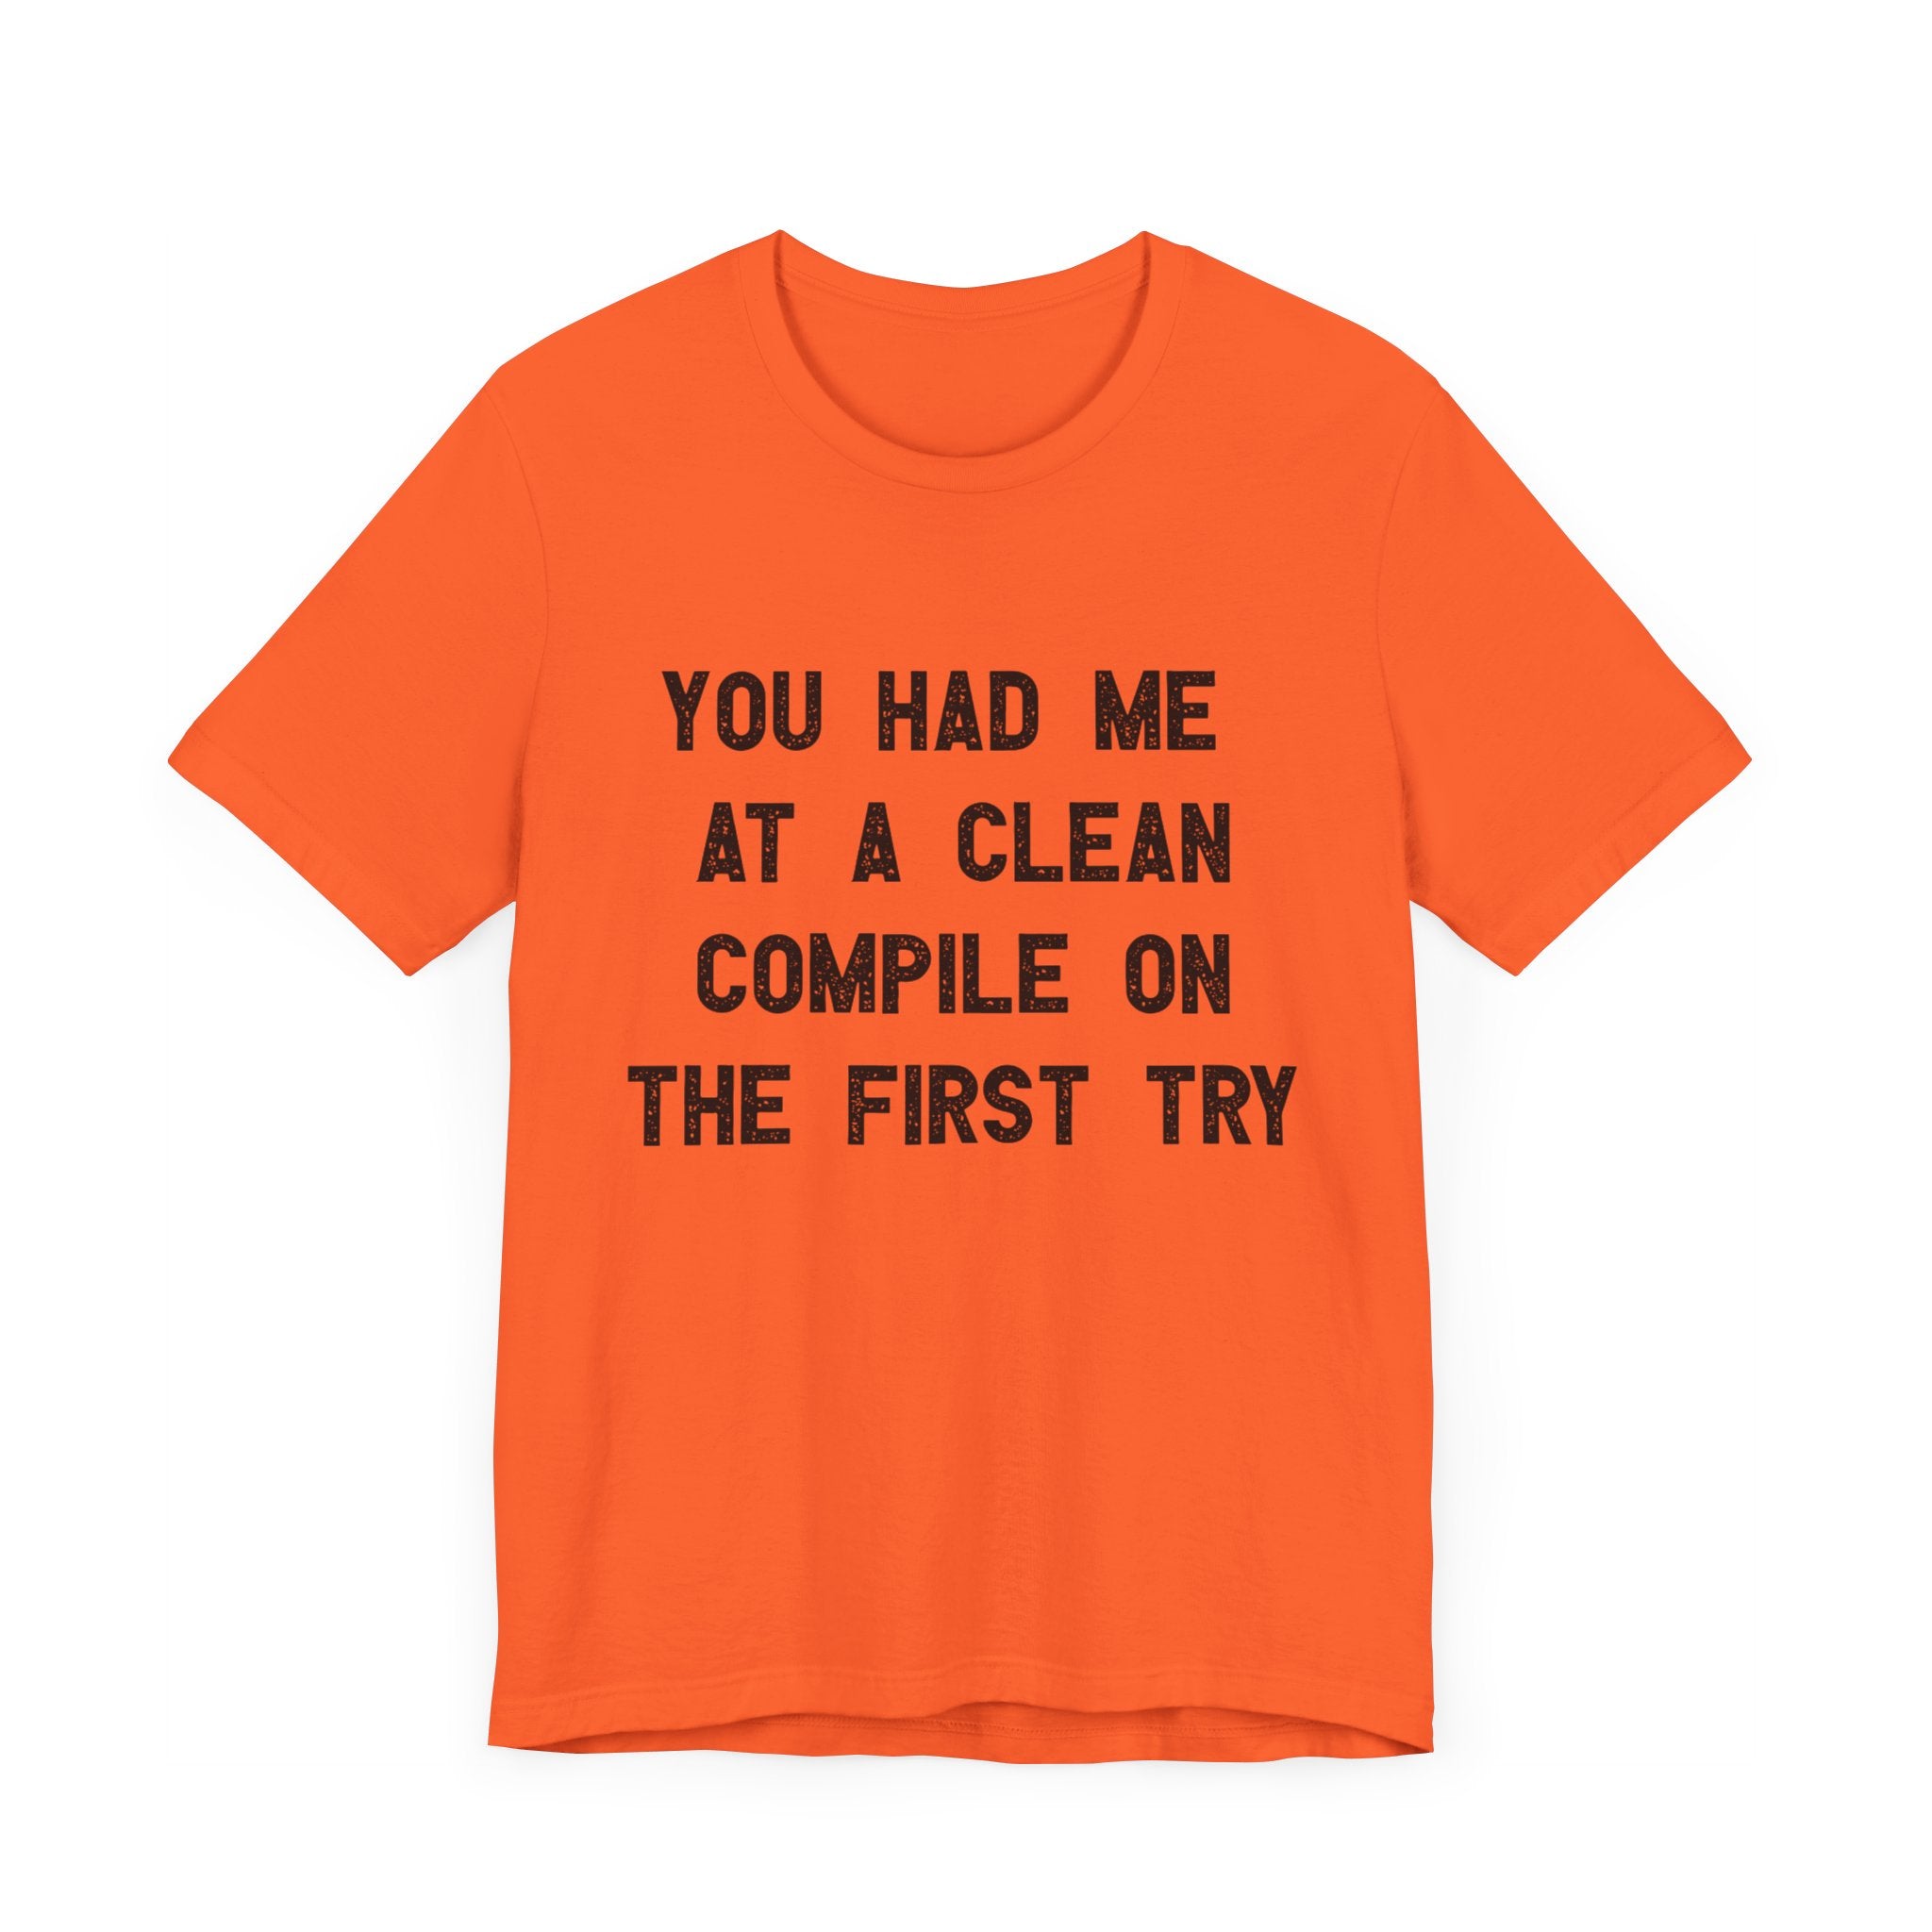 You Had Me At a Clean Compile on the First Try - T-Shirt